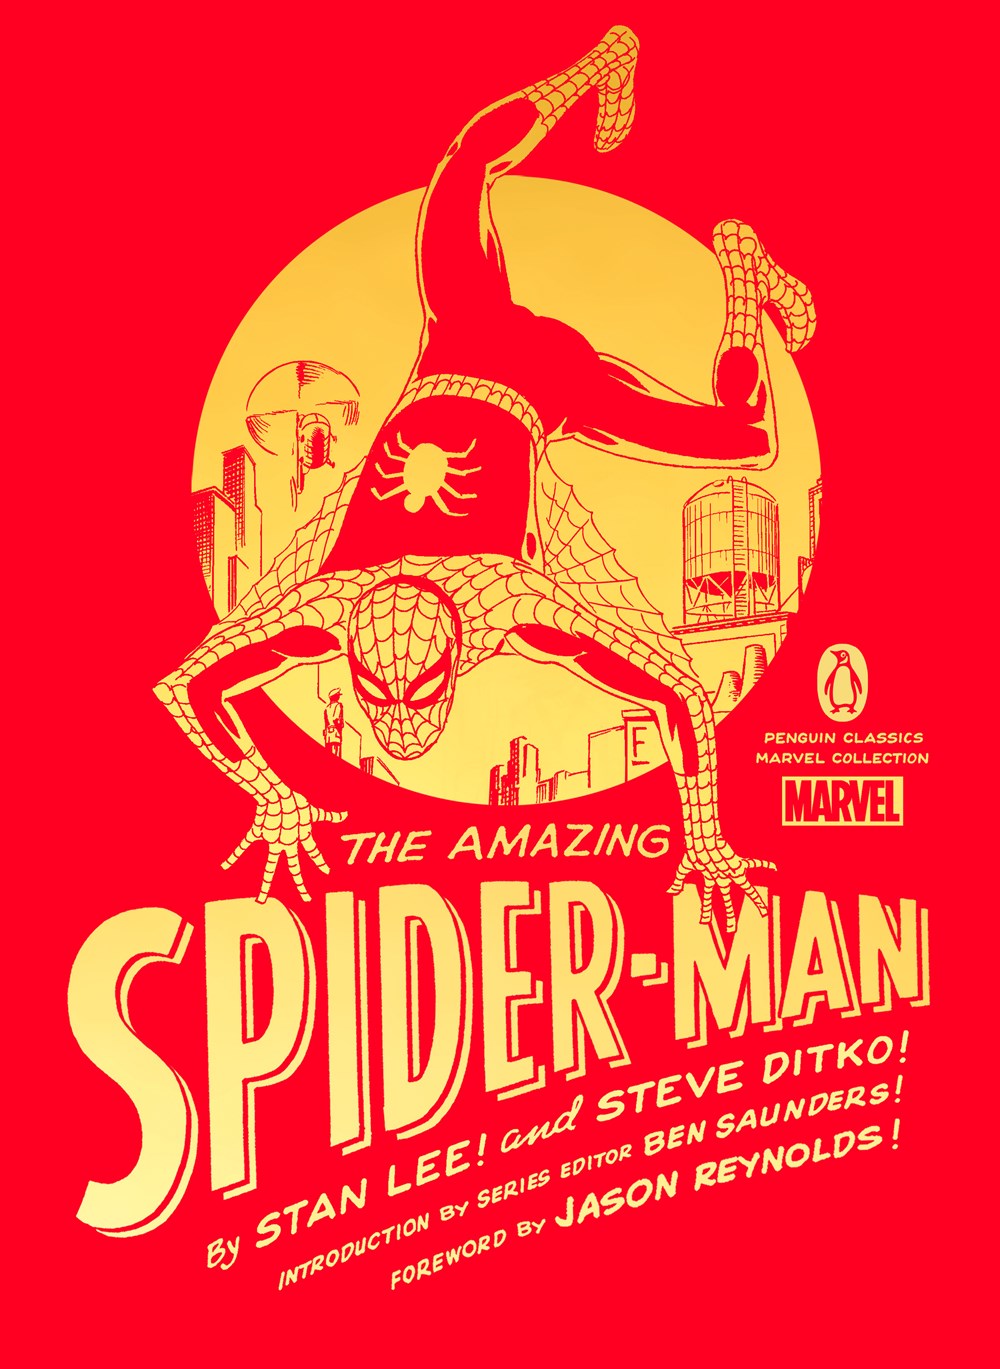 The Amazing Spider-Man (Penguin Classics Marvel Collection)